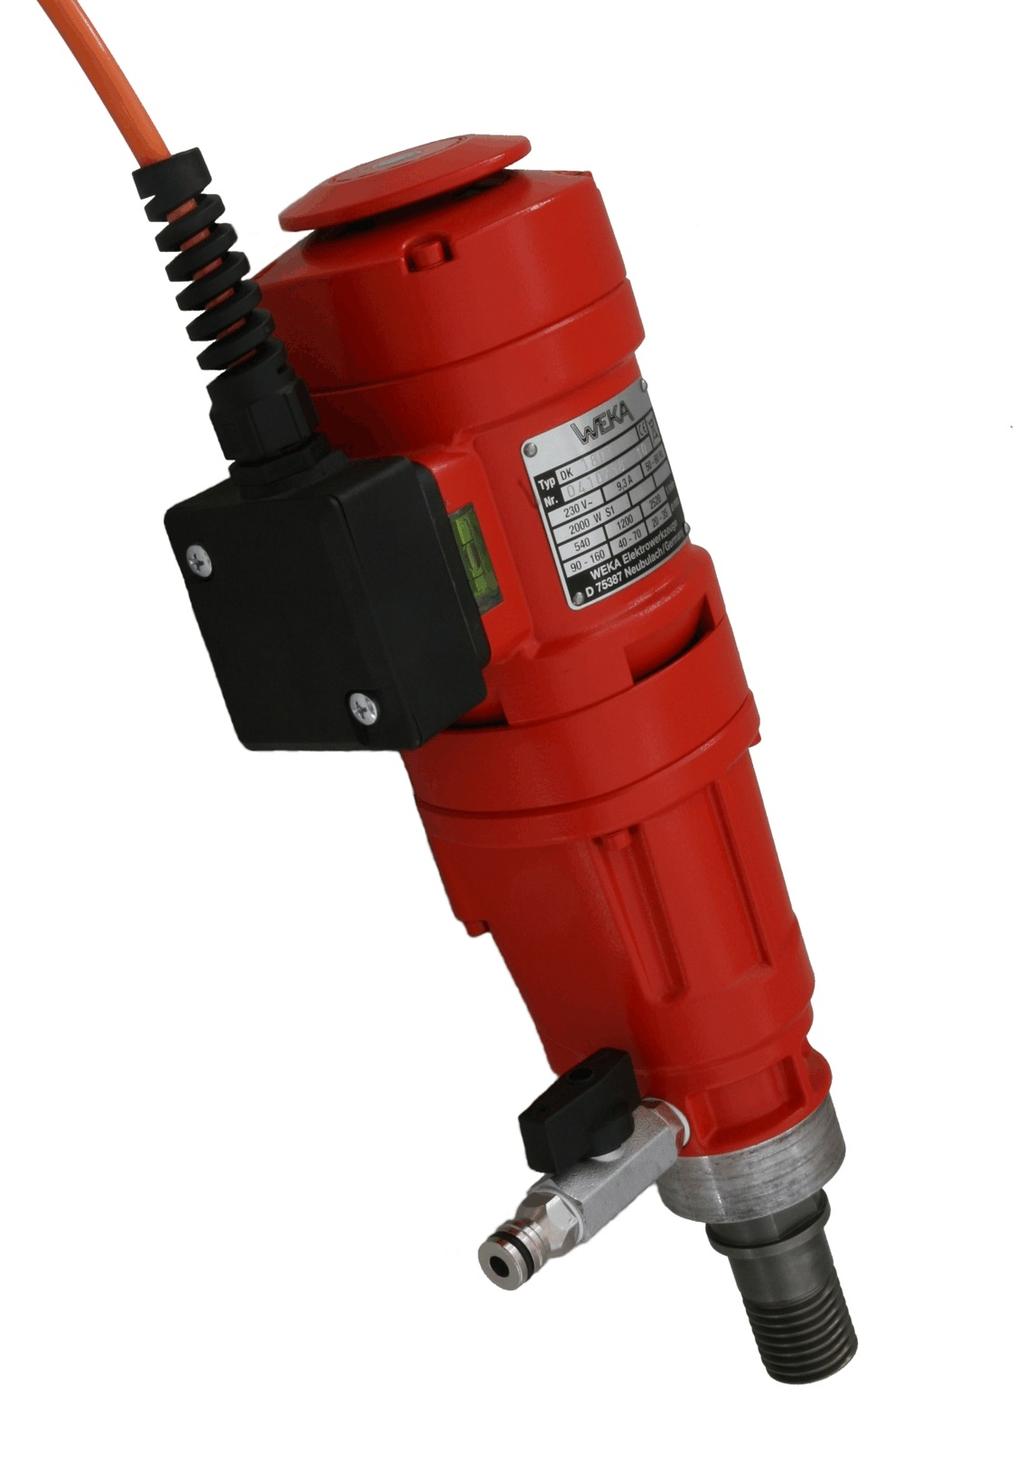 2000 Output power W 1340 Load speed 1/min 540/1200/2520 Length mm 350 Weight kg 5,9 Drilling Ø in concrete c.